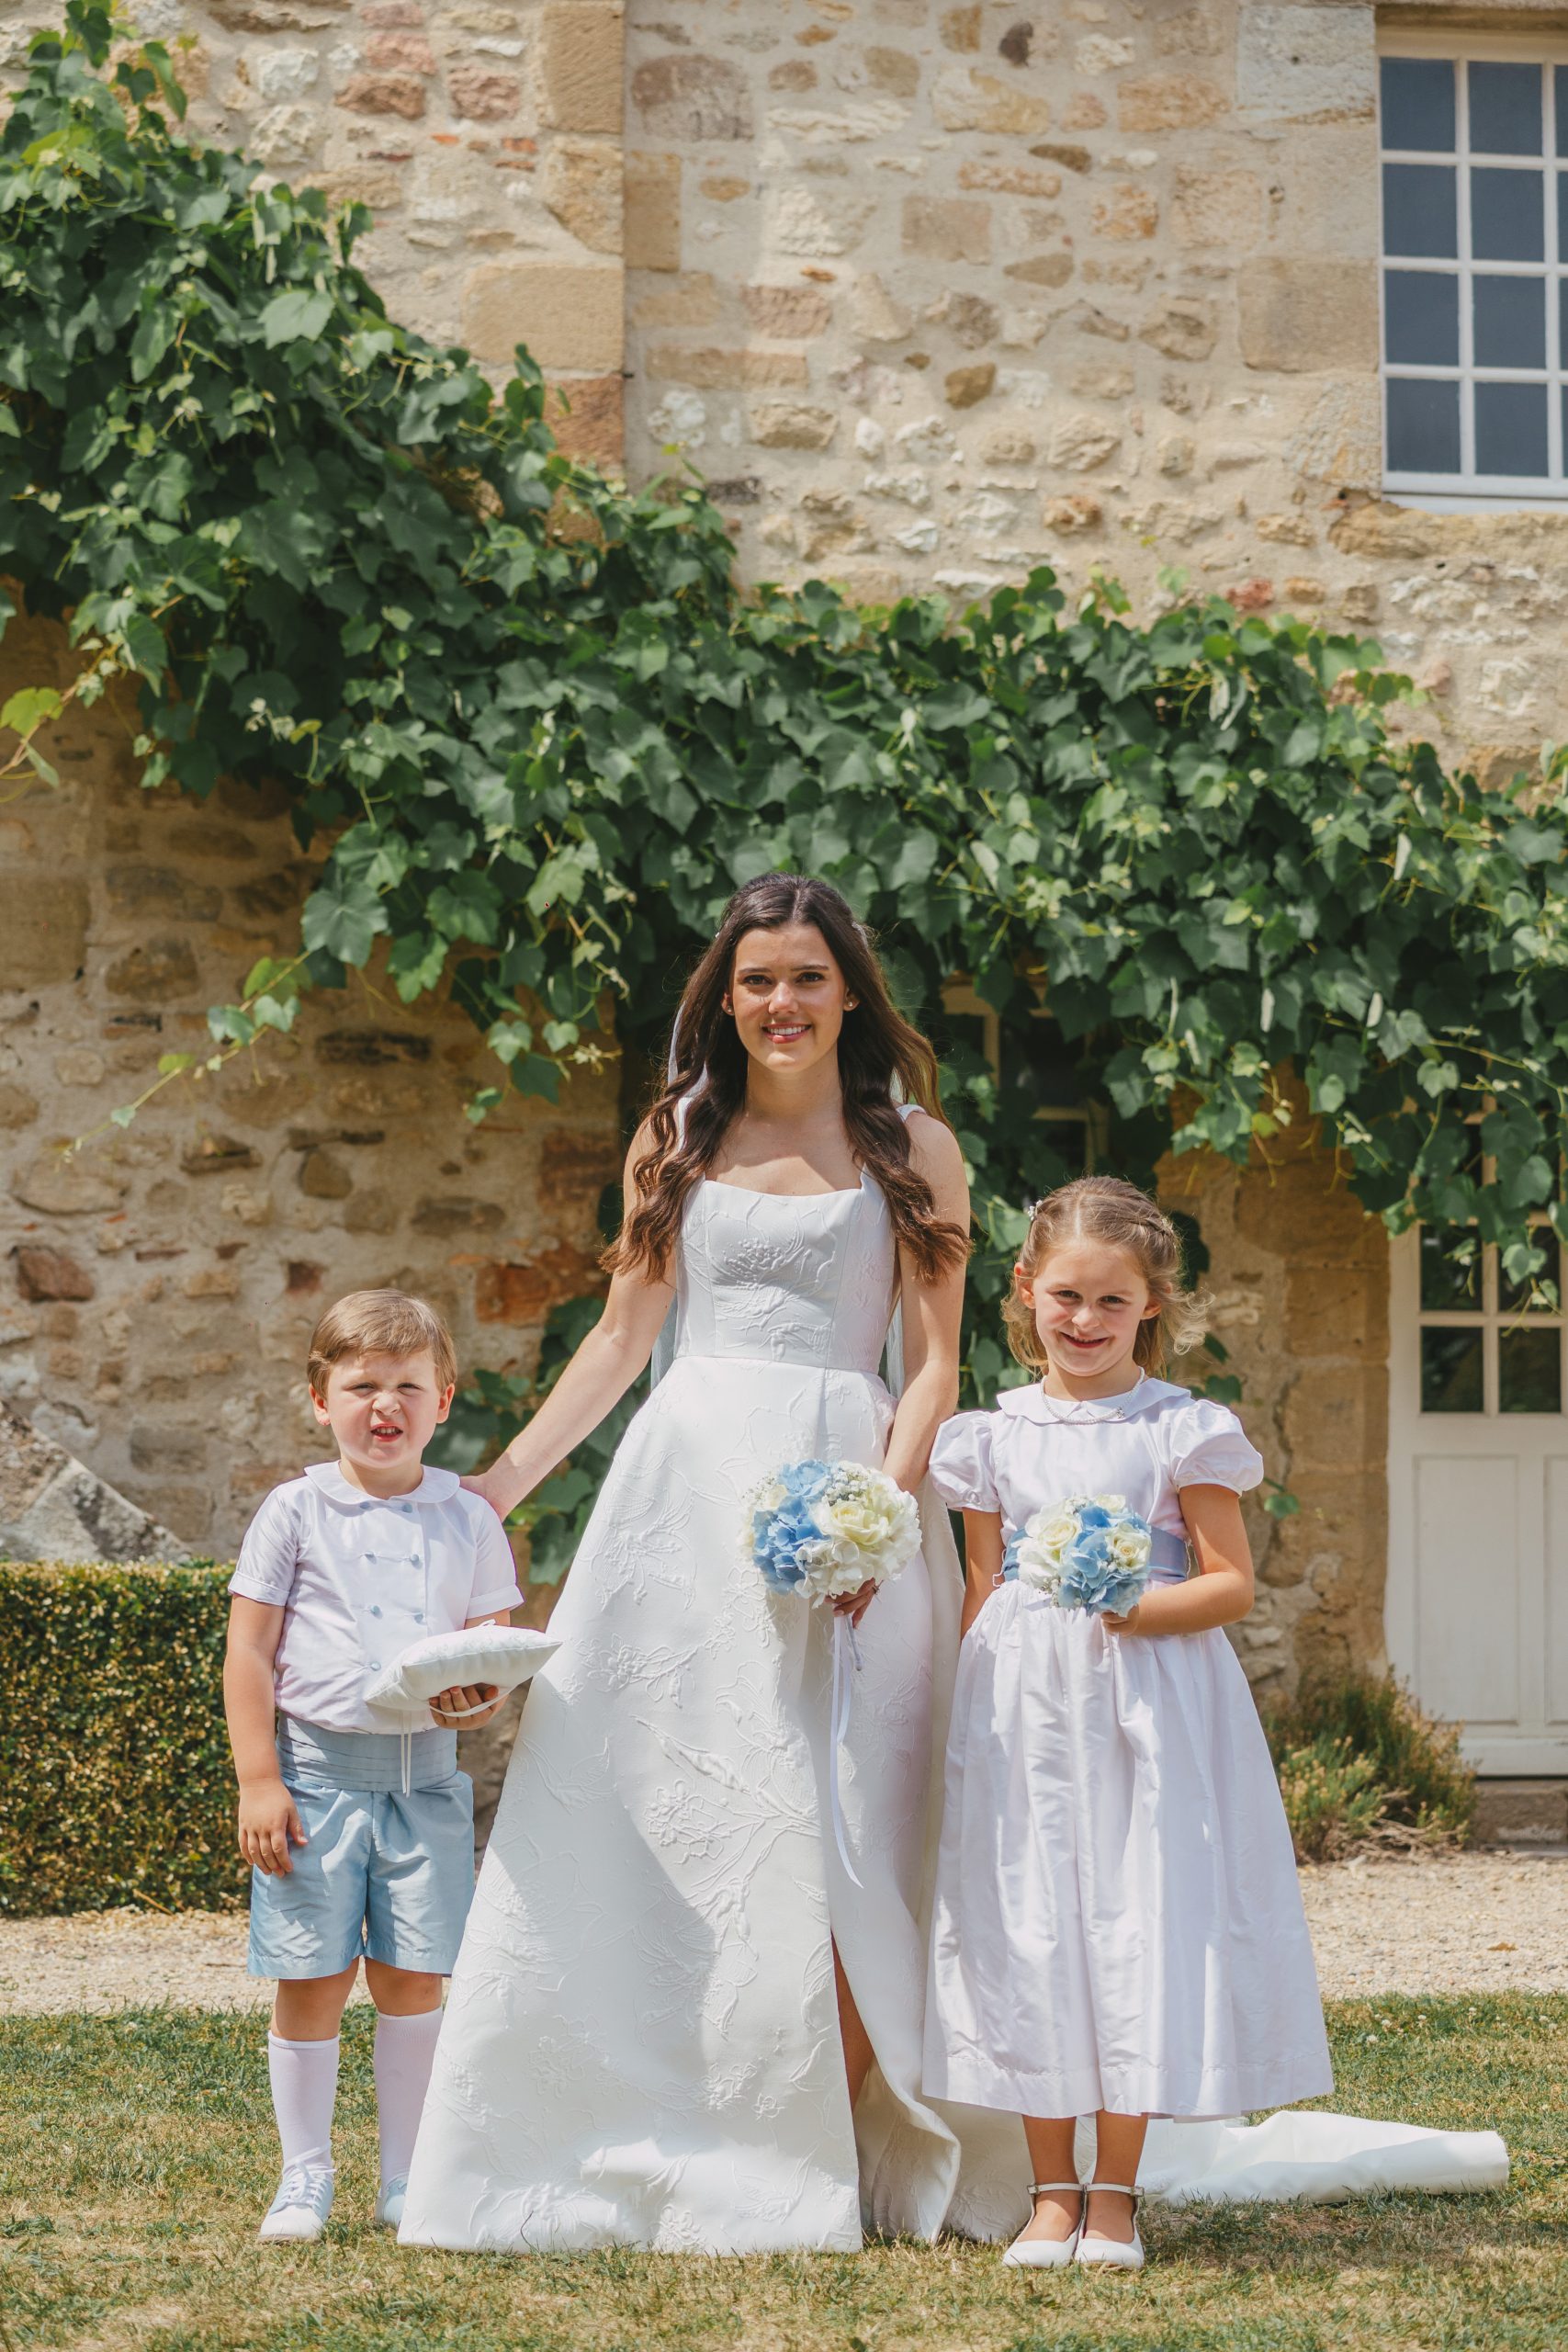 Frances looks stunning in her white silk Anne Barge gown, joined by ringbearer Marks King and flower girl Margaret King, cousins of the bride. 